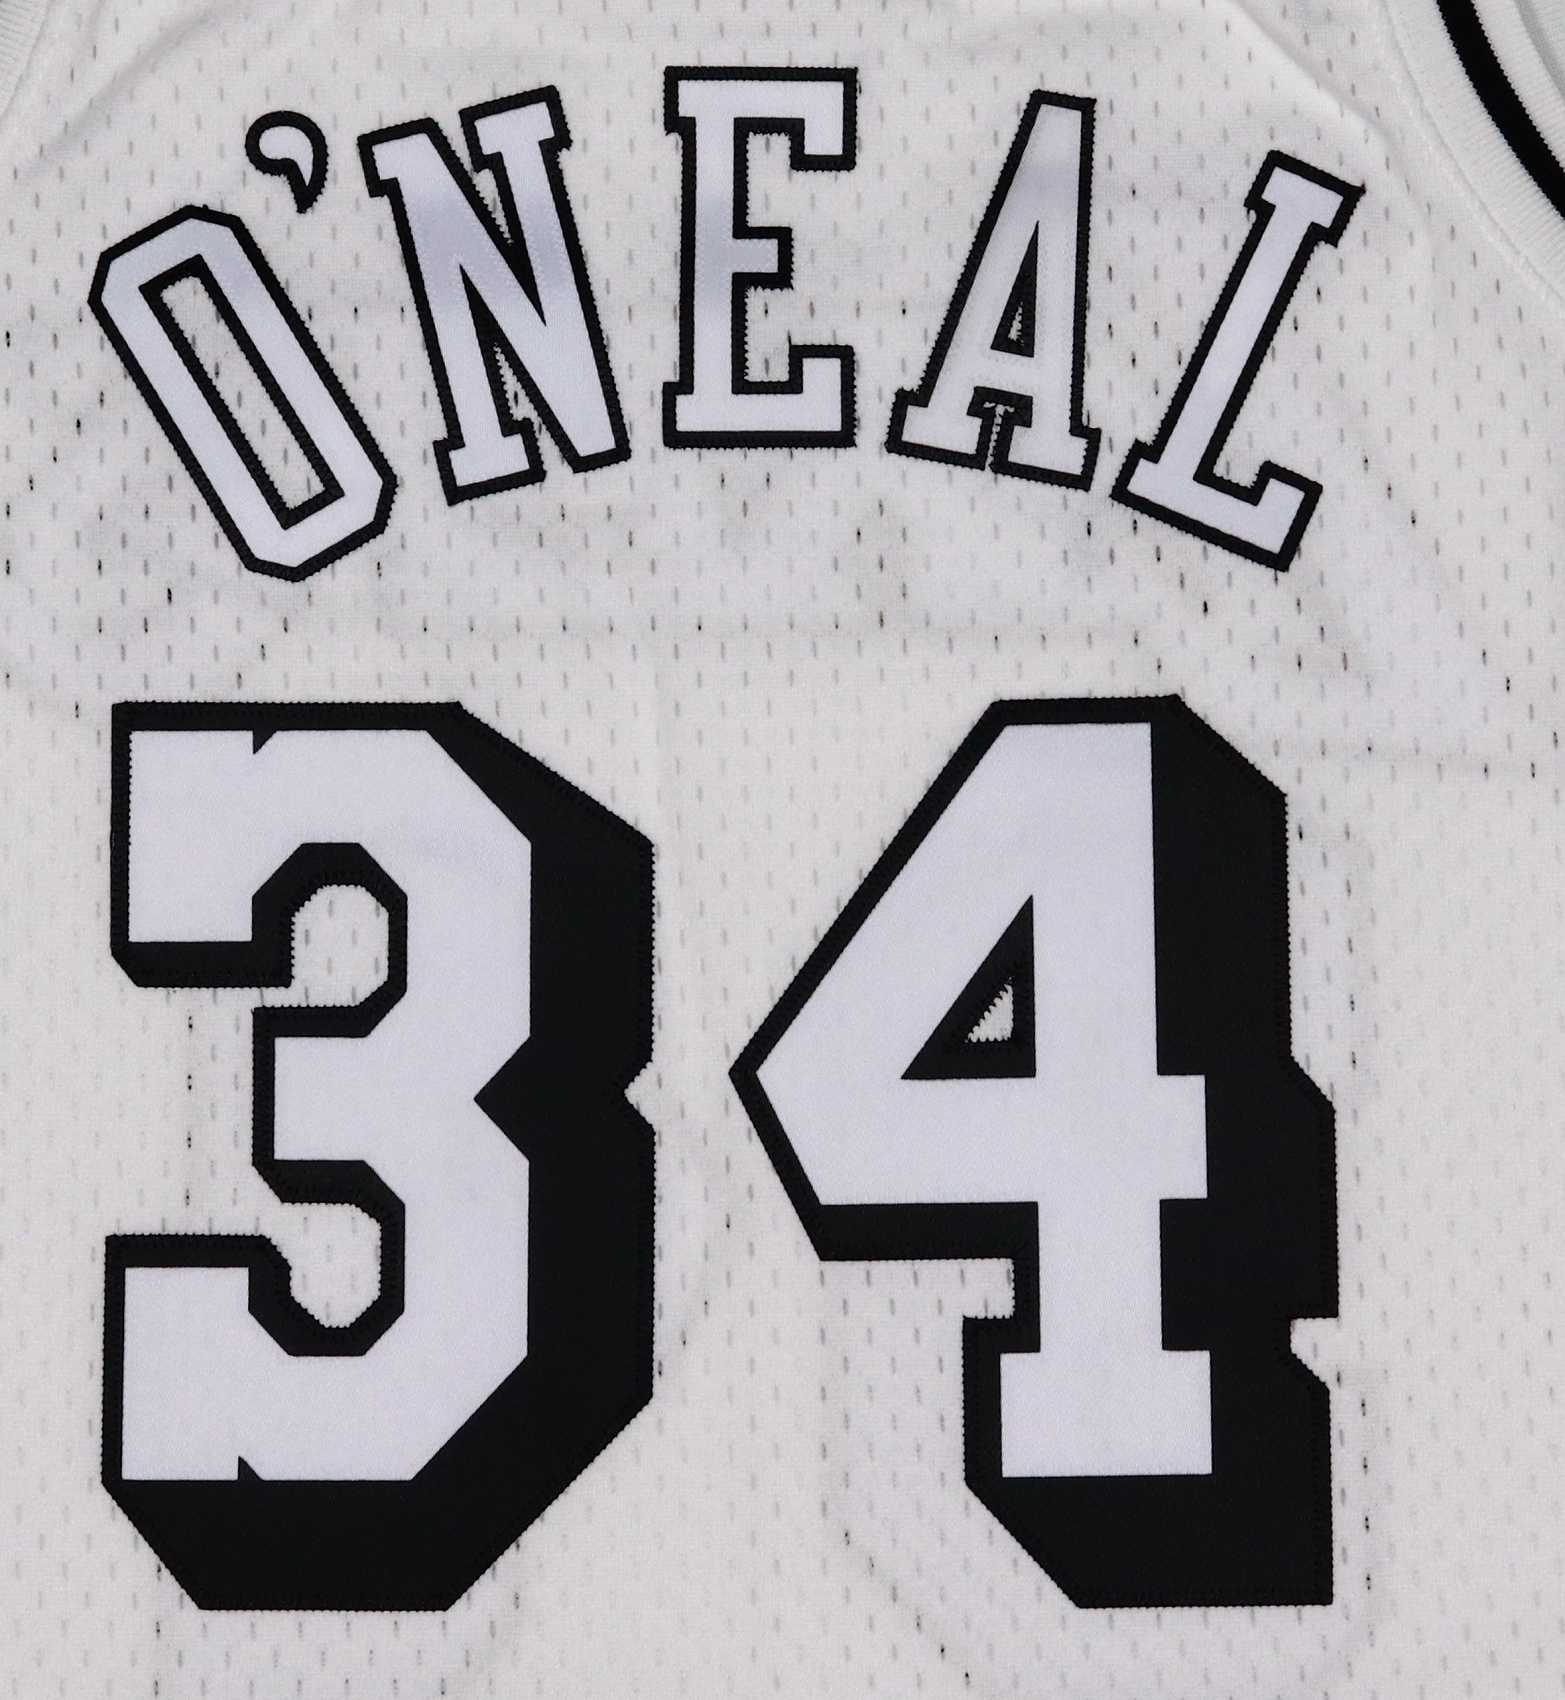 Shaquille O'Neal #34 Los Angeles Lakers NBA White Swingman Jersey Mitchell & Ness